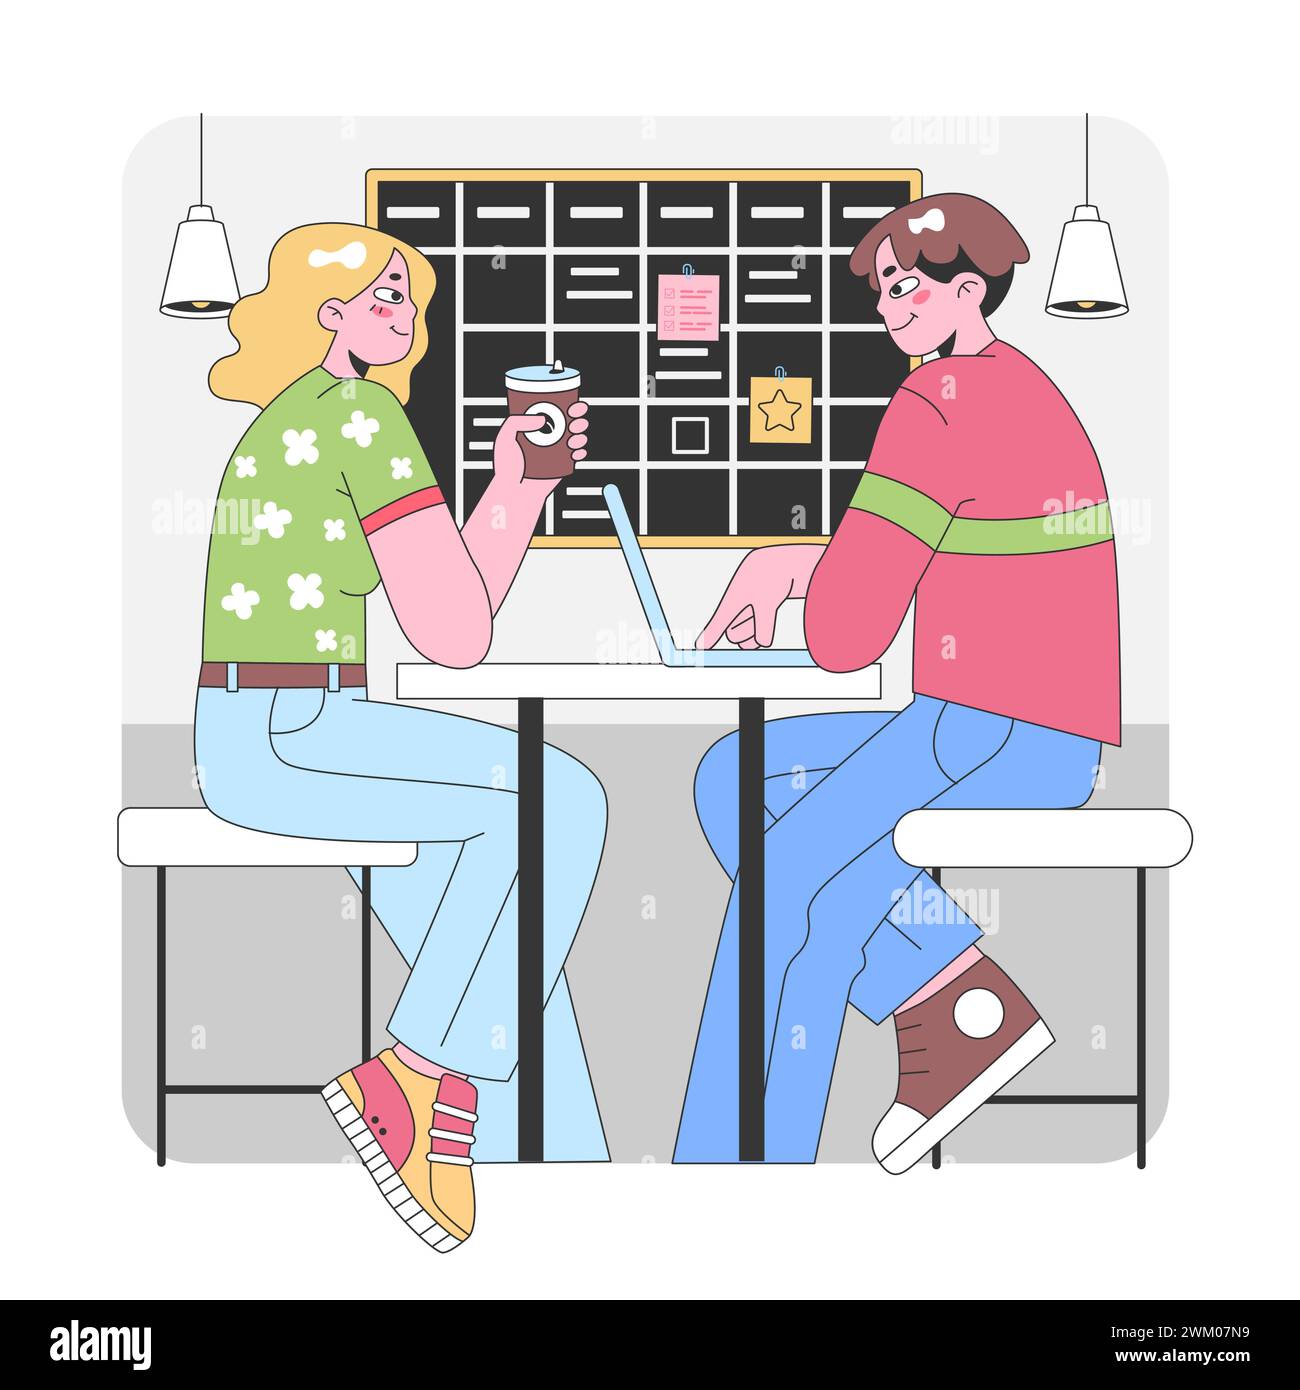 Colleagues collaborating in a cozy workspace. Sharing ideas over coffee, laptop-focused tasks, and a well-organized bulletin board. Casual work attire, engaging discussion. Flat vector illustration Stock Vector